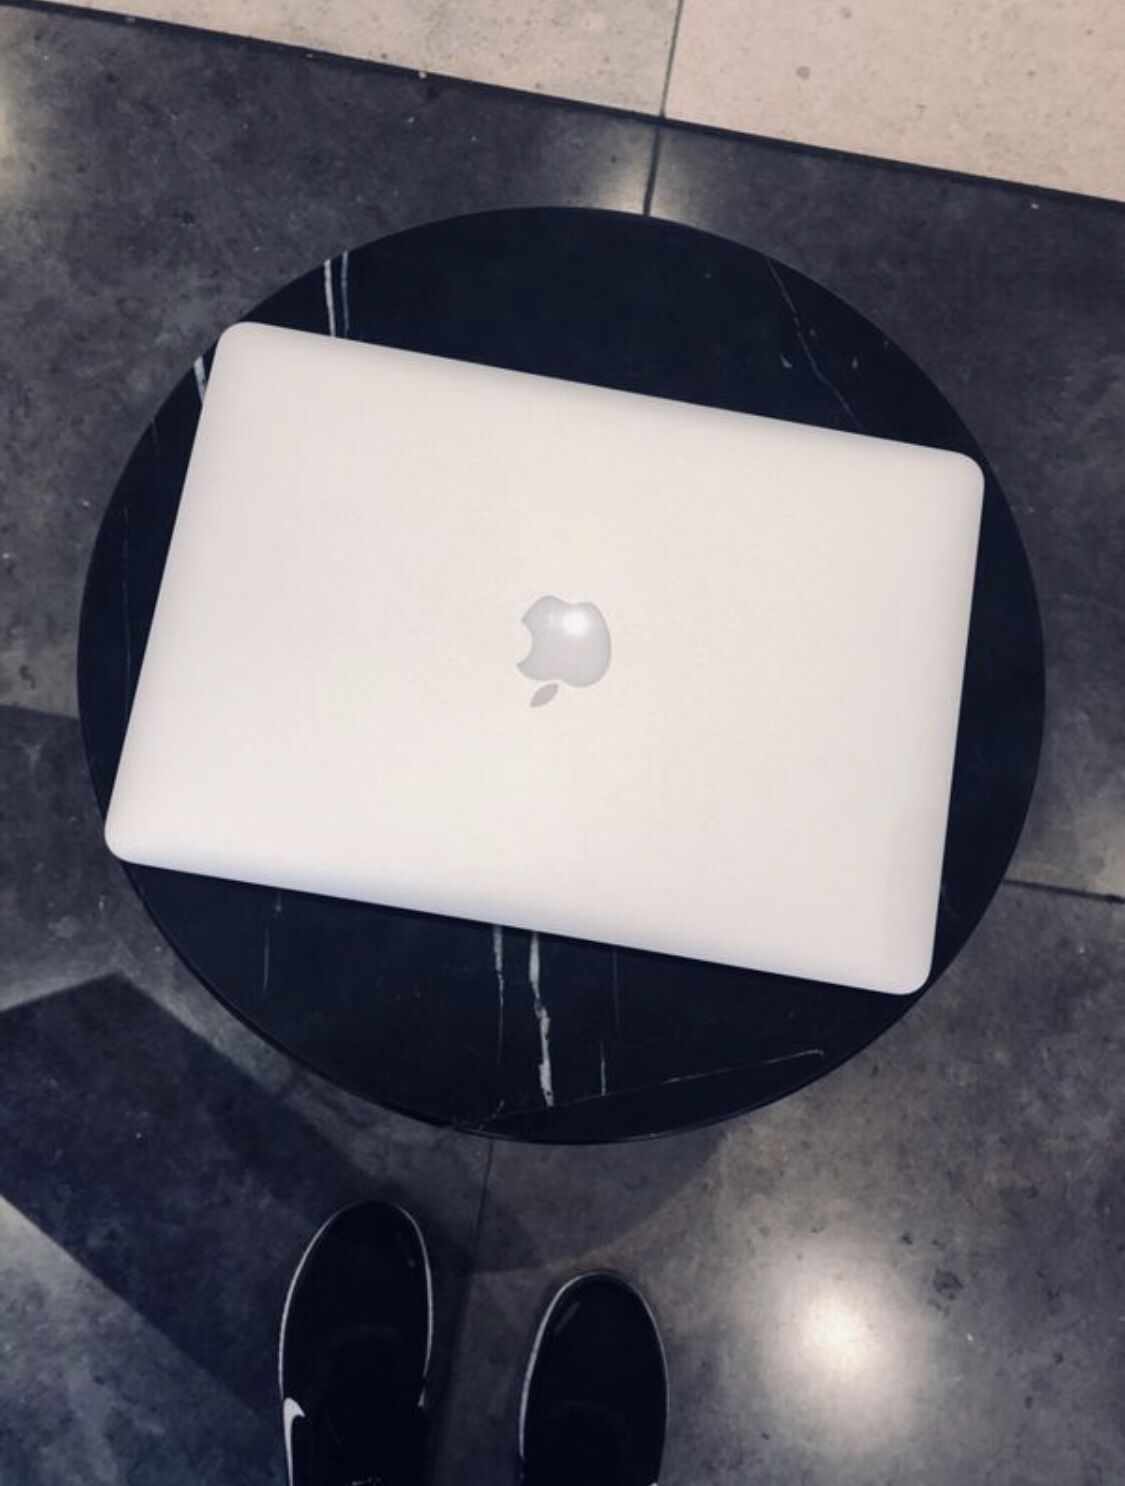 MacBook Air with Apple Care